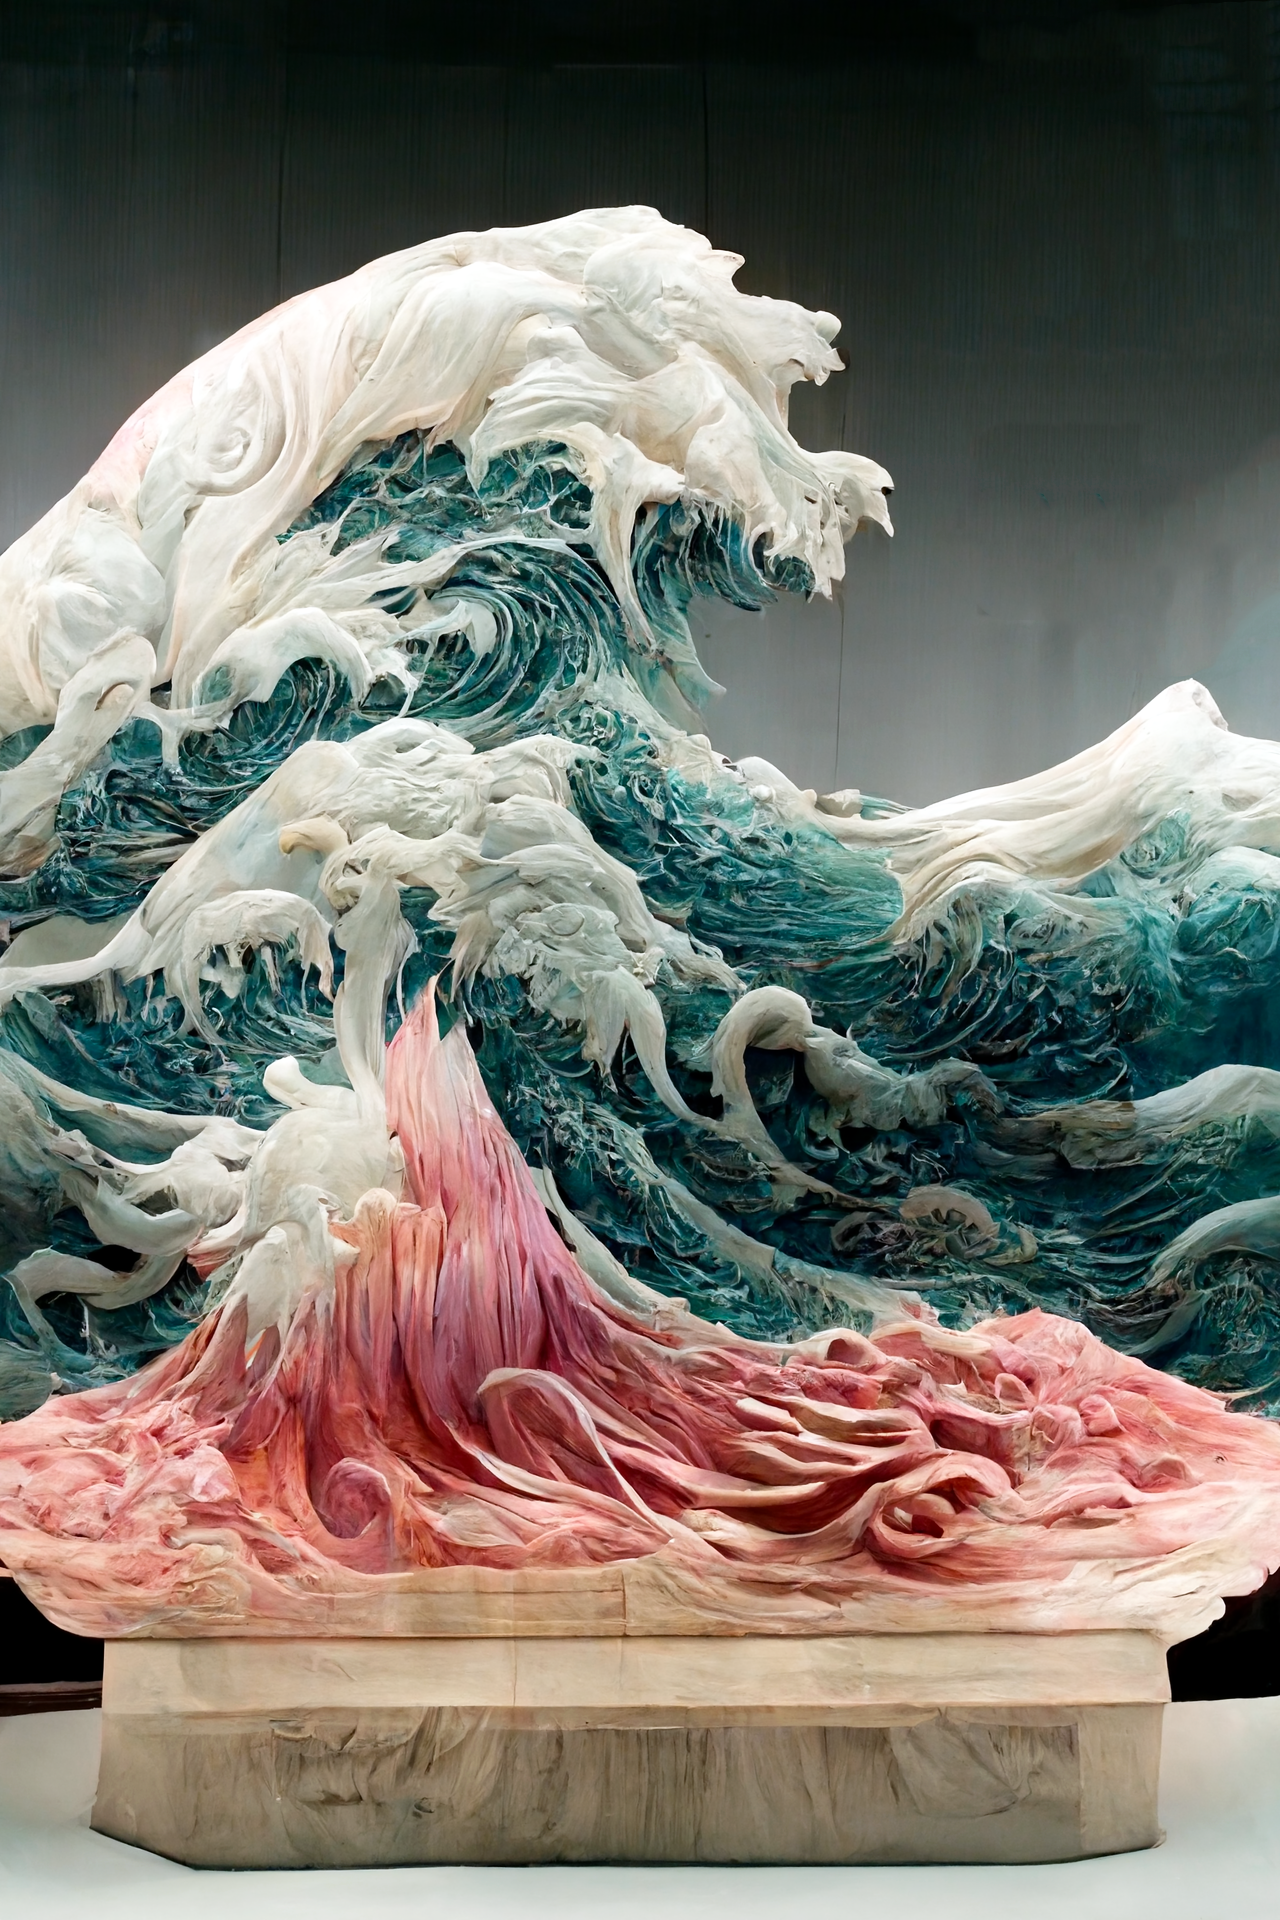 Carved Diorama of The Great Wave